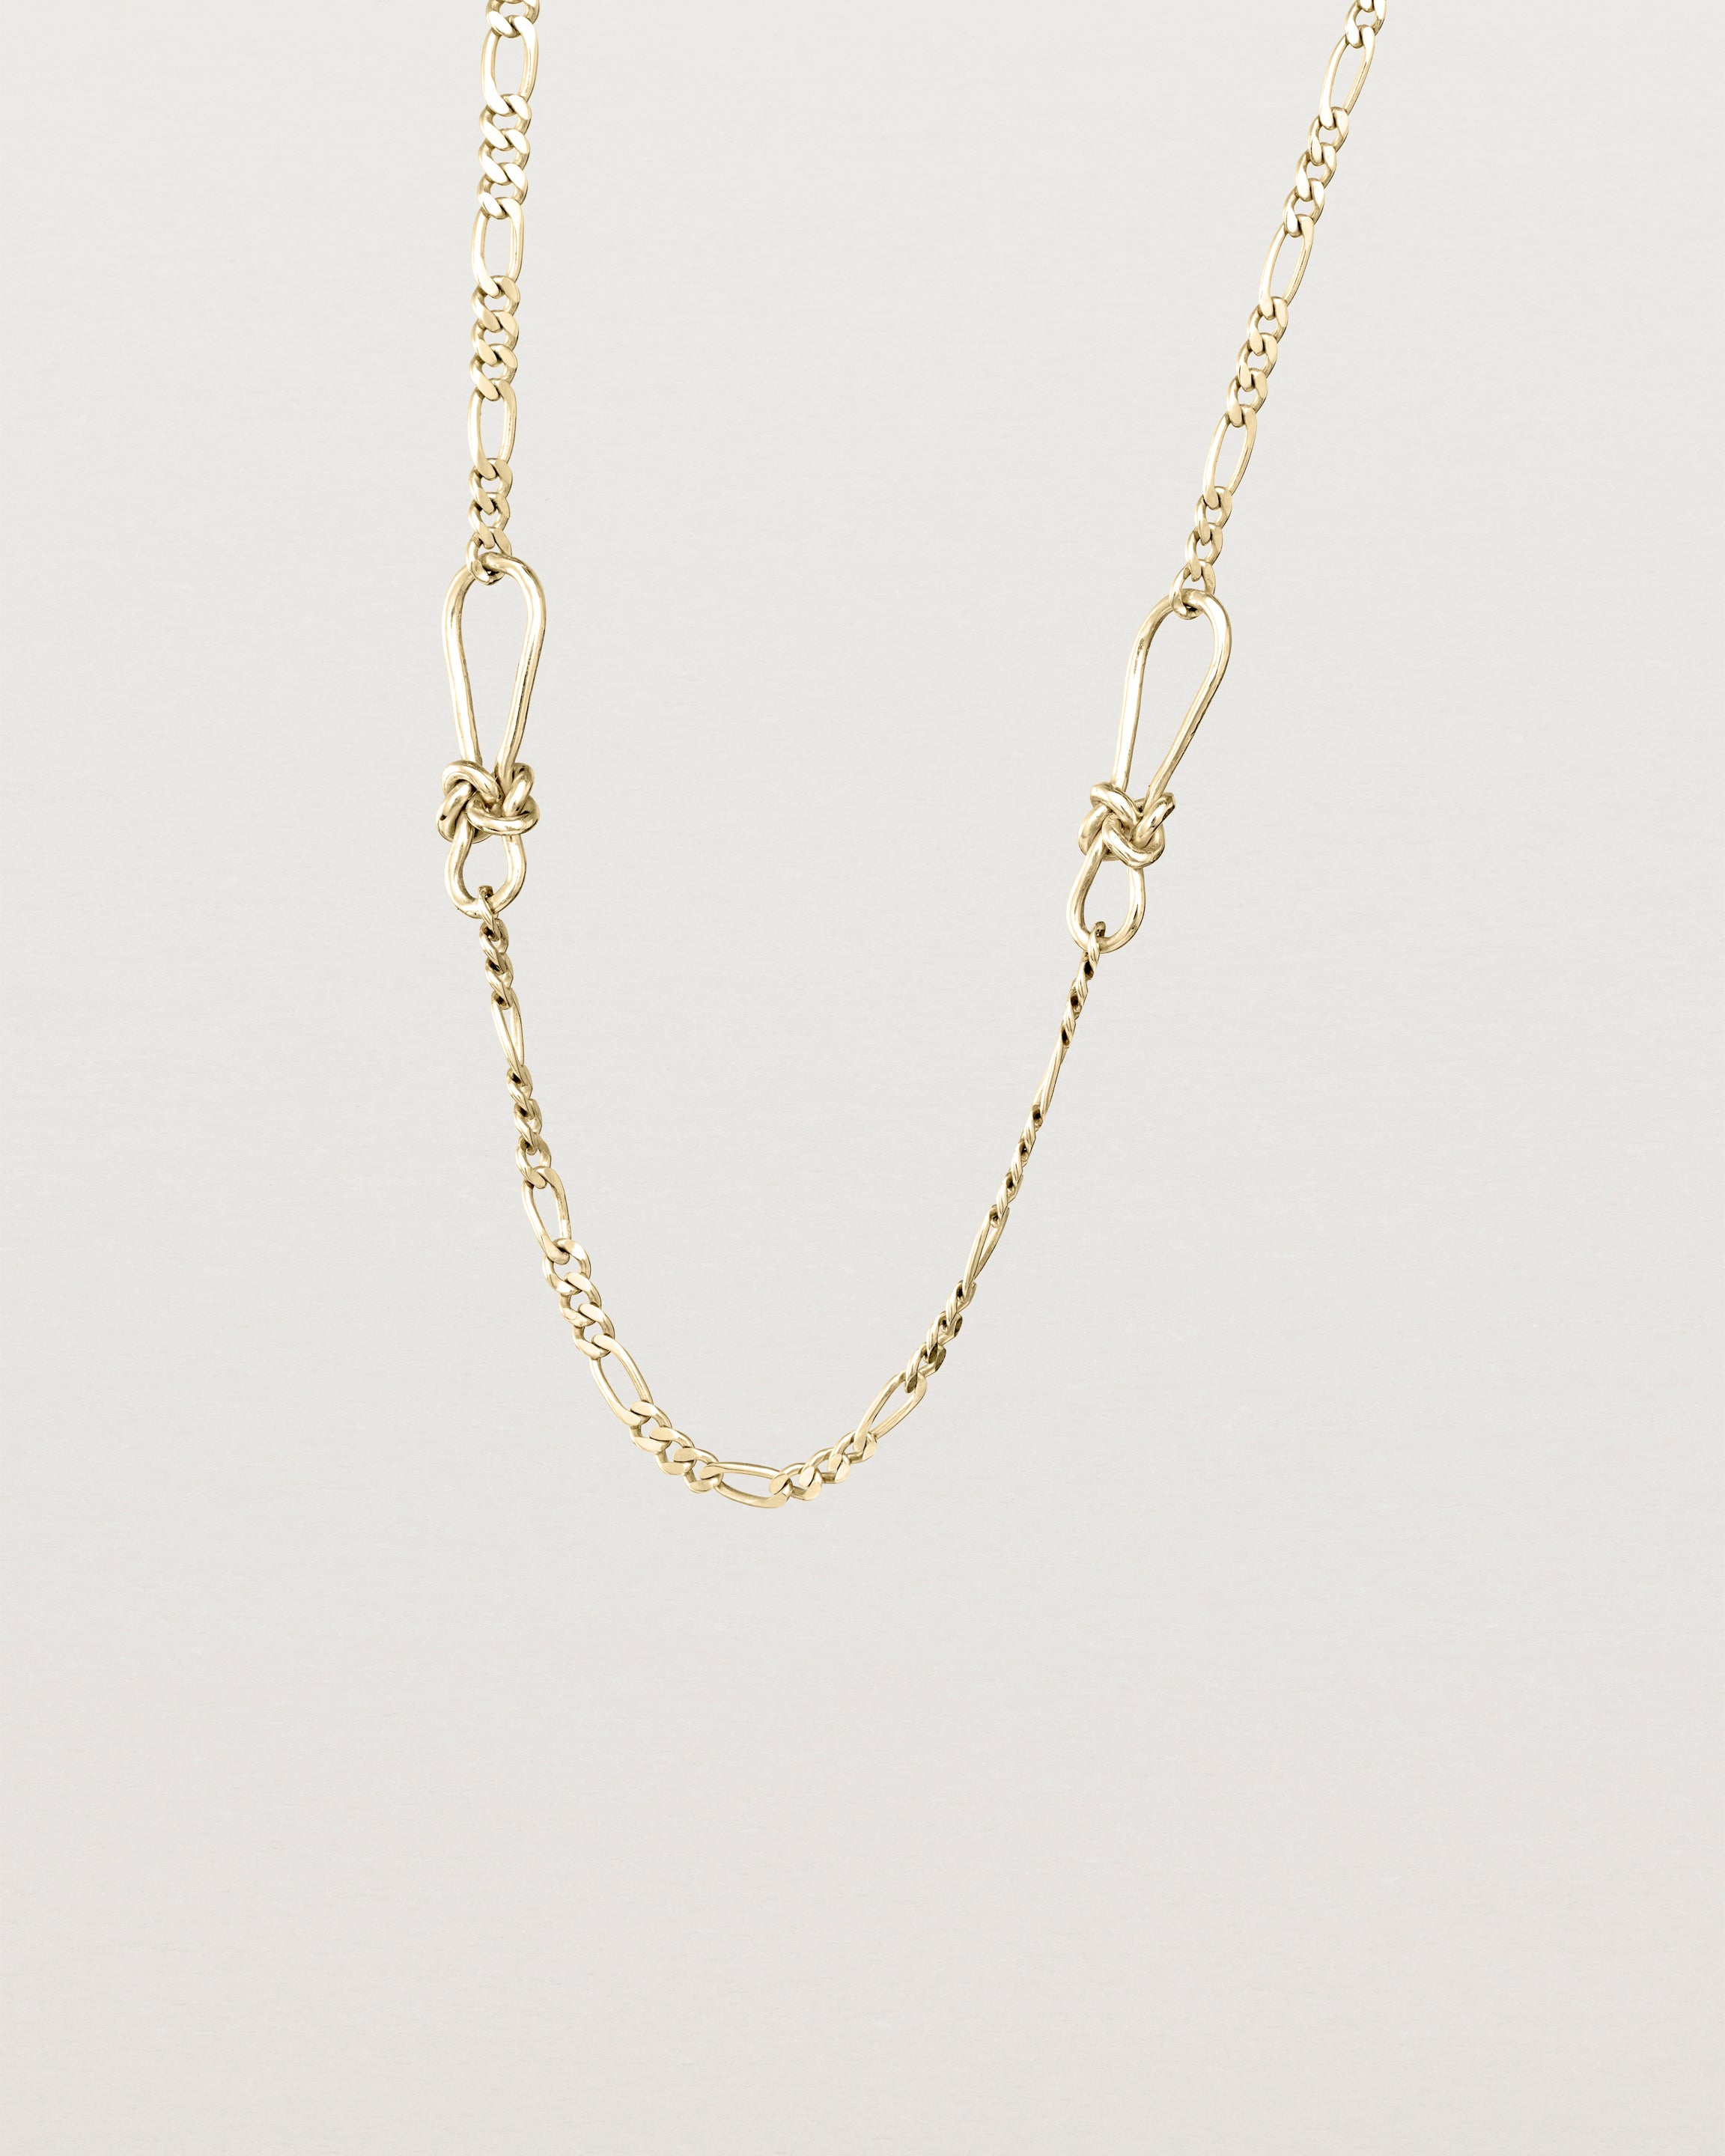 Angled view of the Dà anam Necklace in yellow gold.